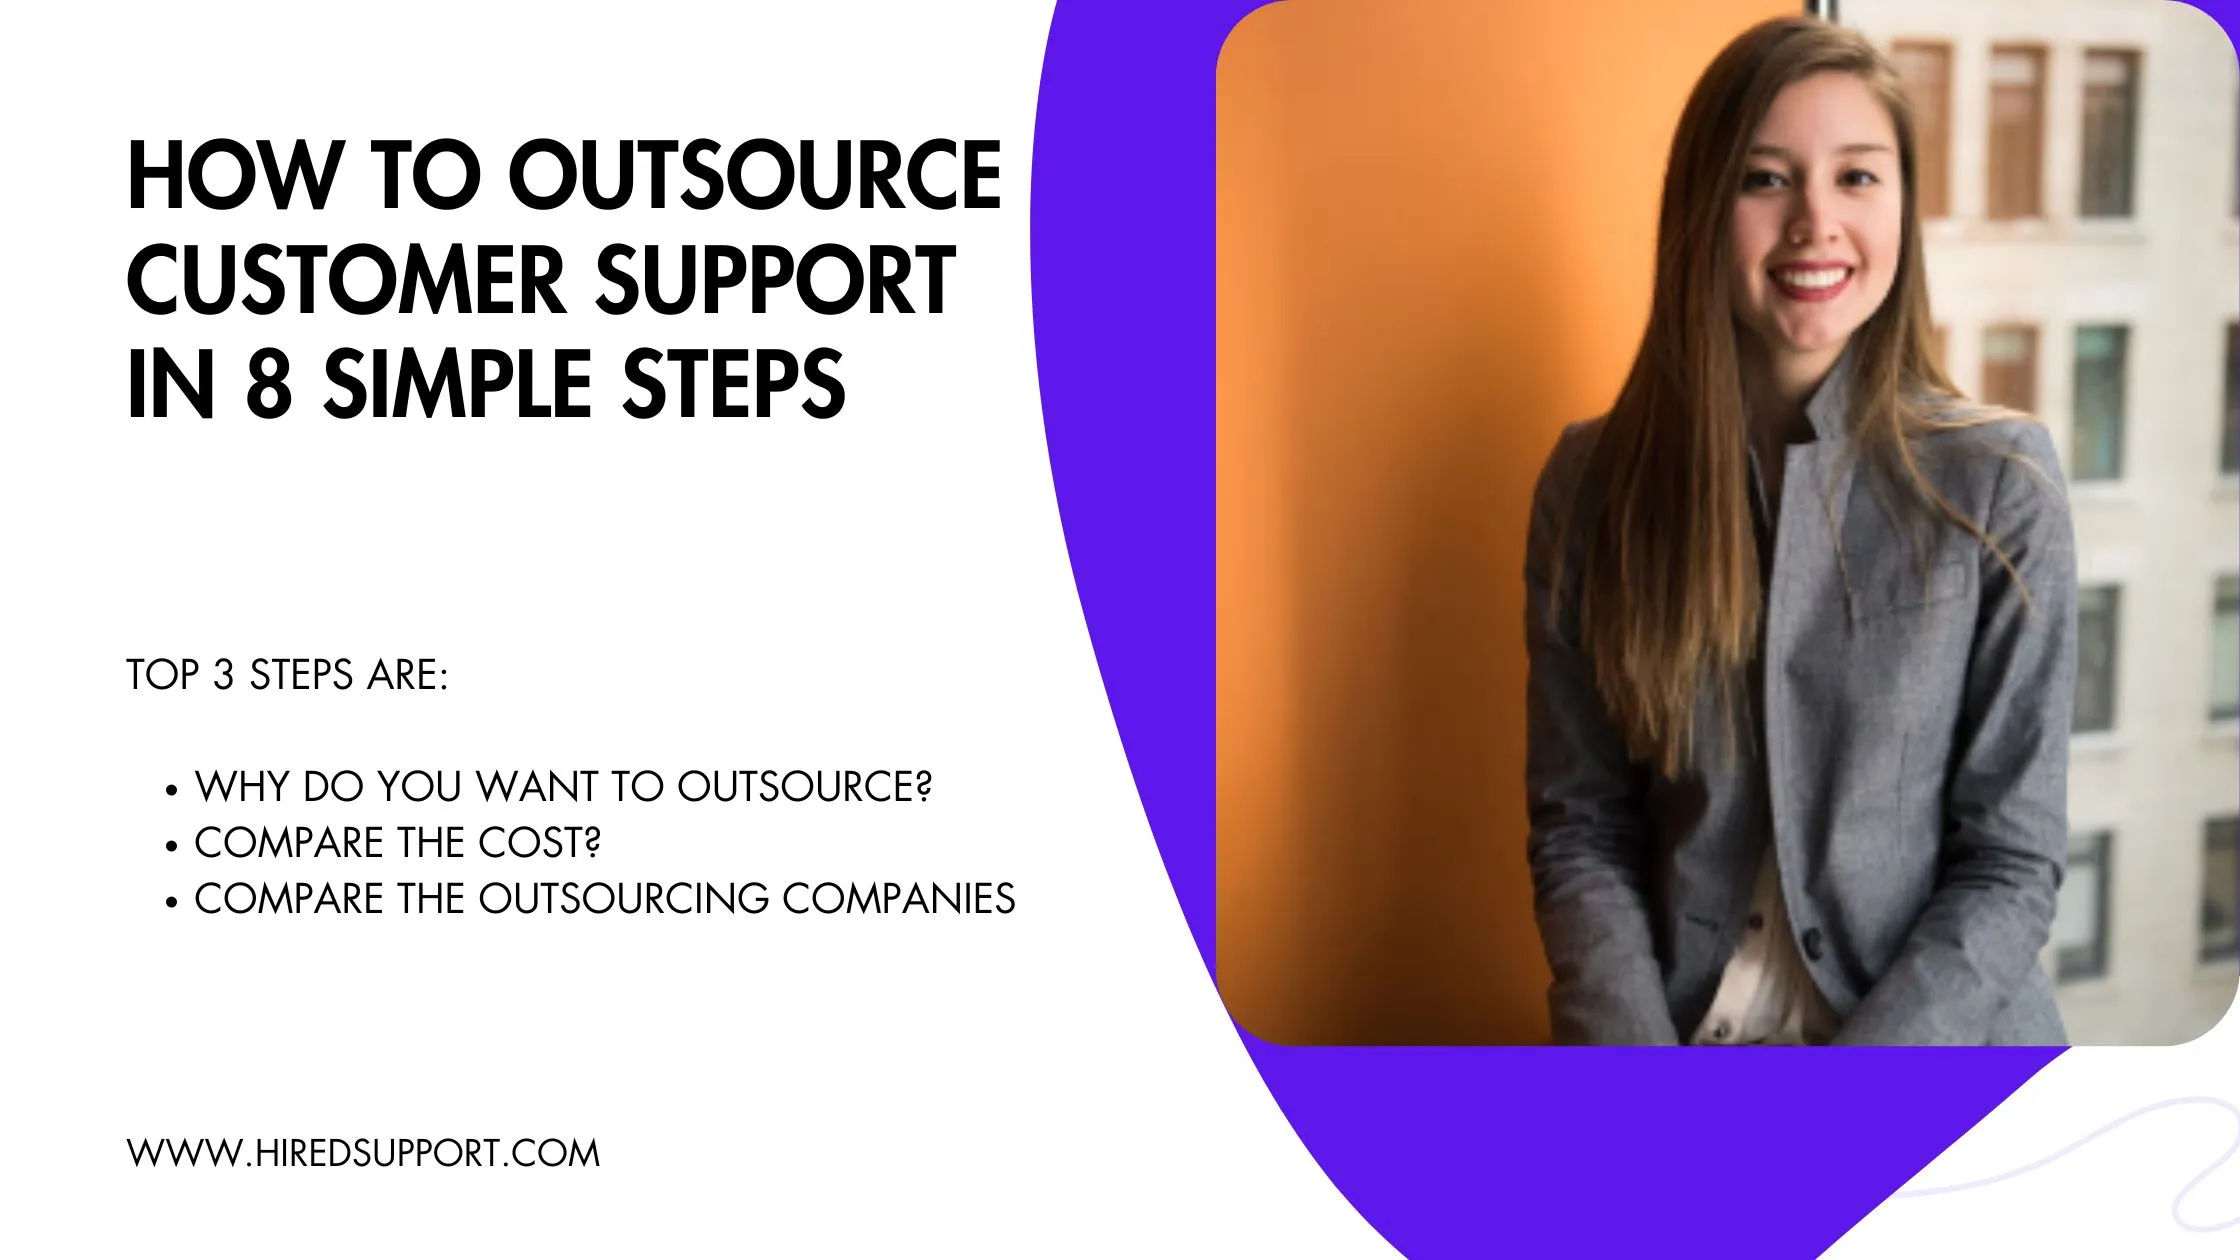 How to Outsource Customer Support in 8 Simple Steps